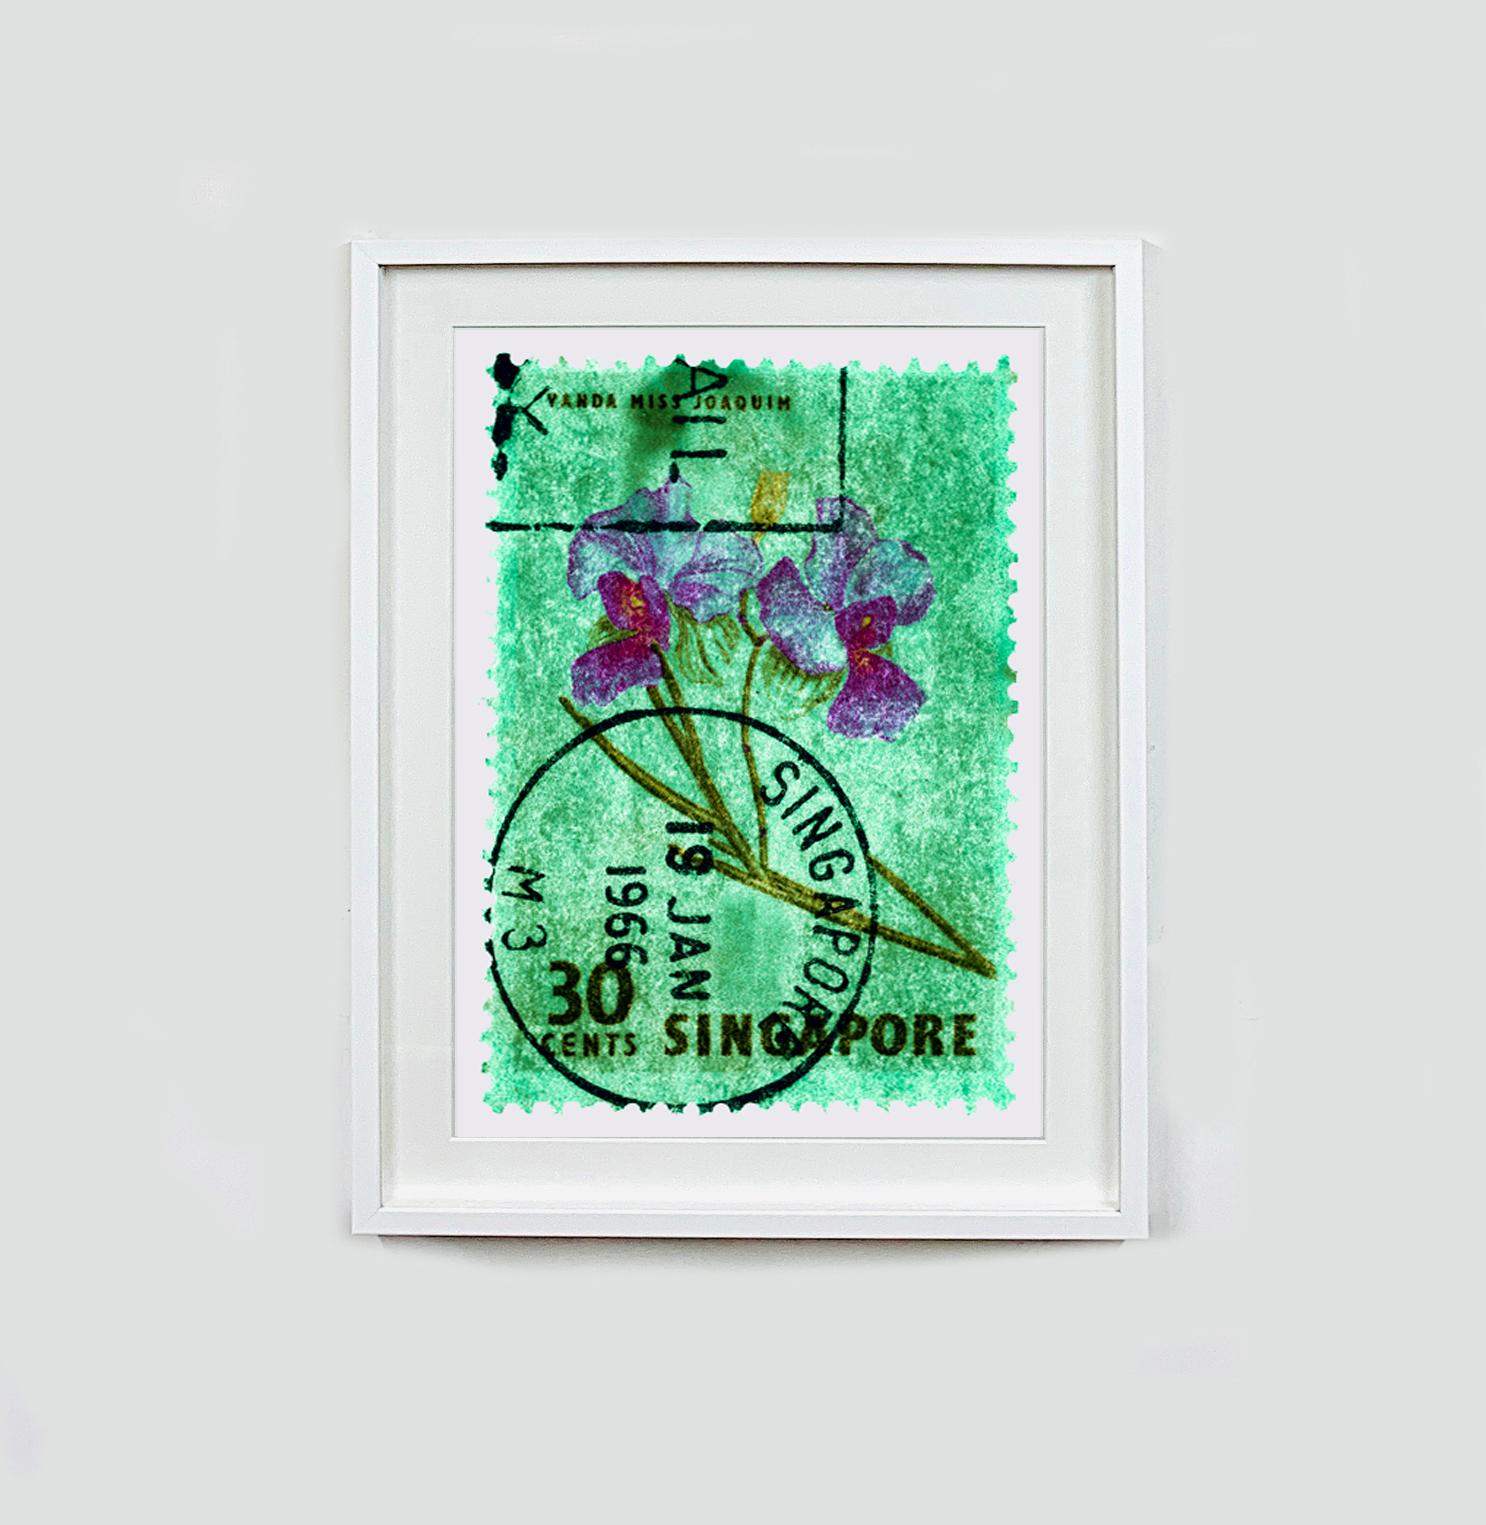 Singapore Stamp Collection, 30c Singapore Orchid Green - Floral color photo - Photograph by Heidler & Heeps